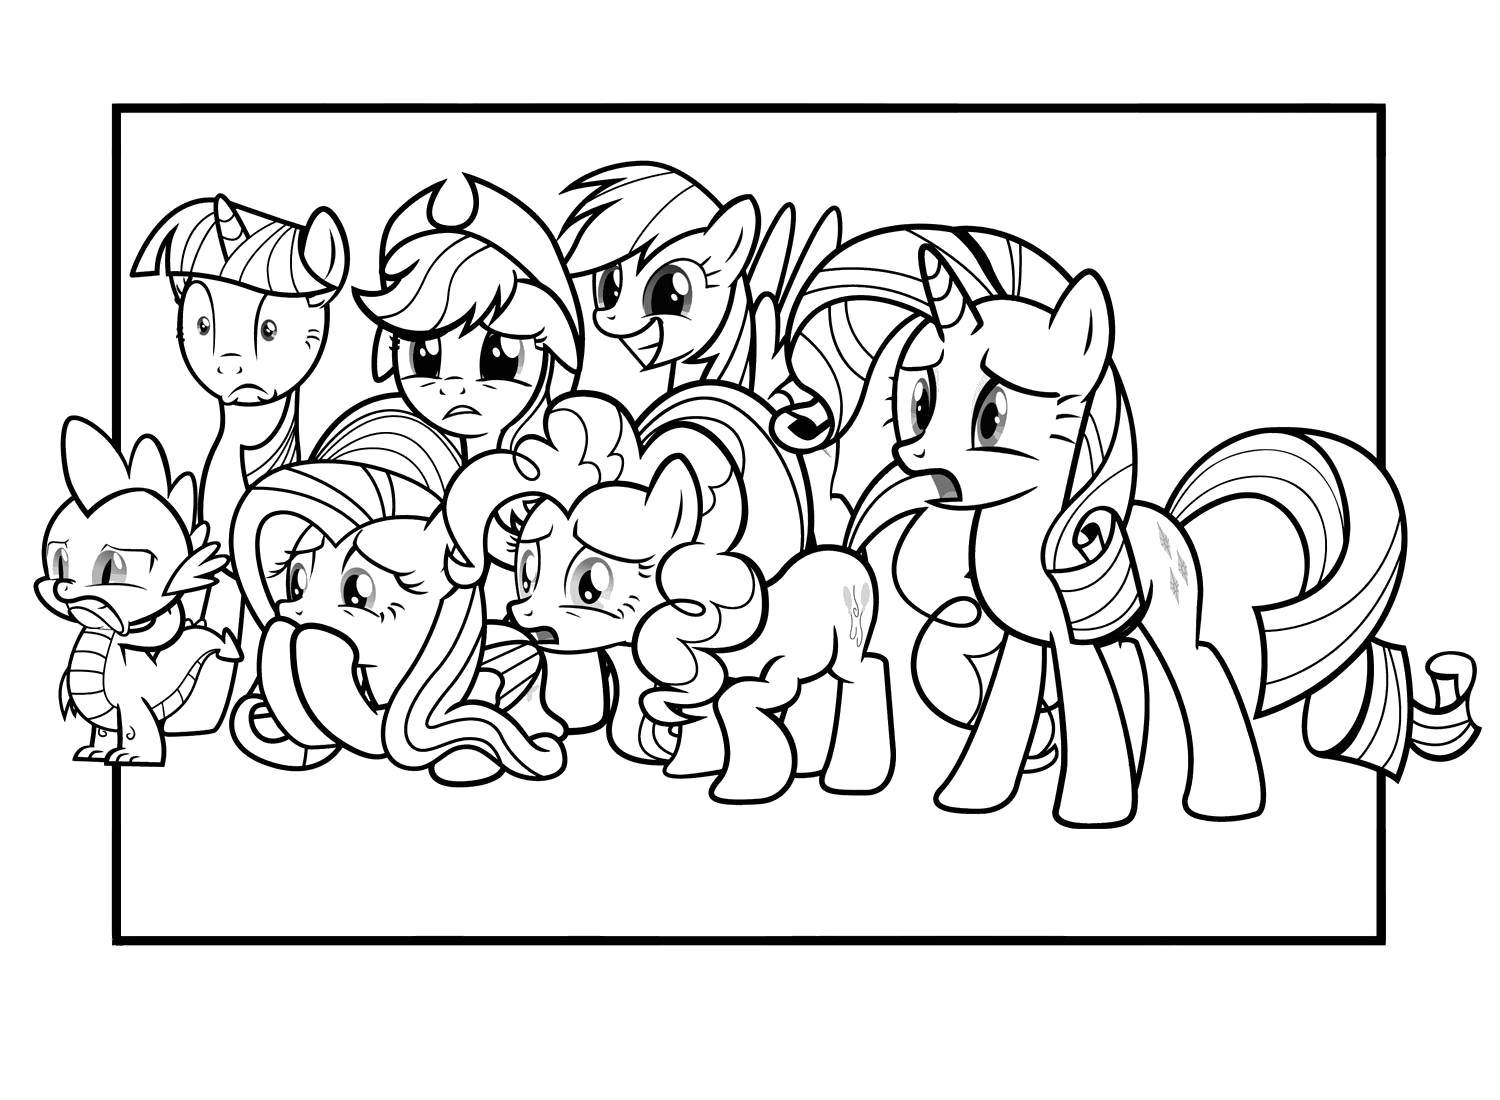 Coloring The frightened pony. Category Ponies. Tags:  Pony, My little pony.